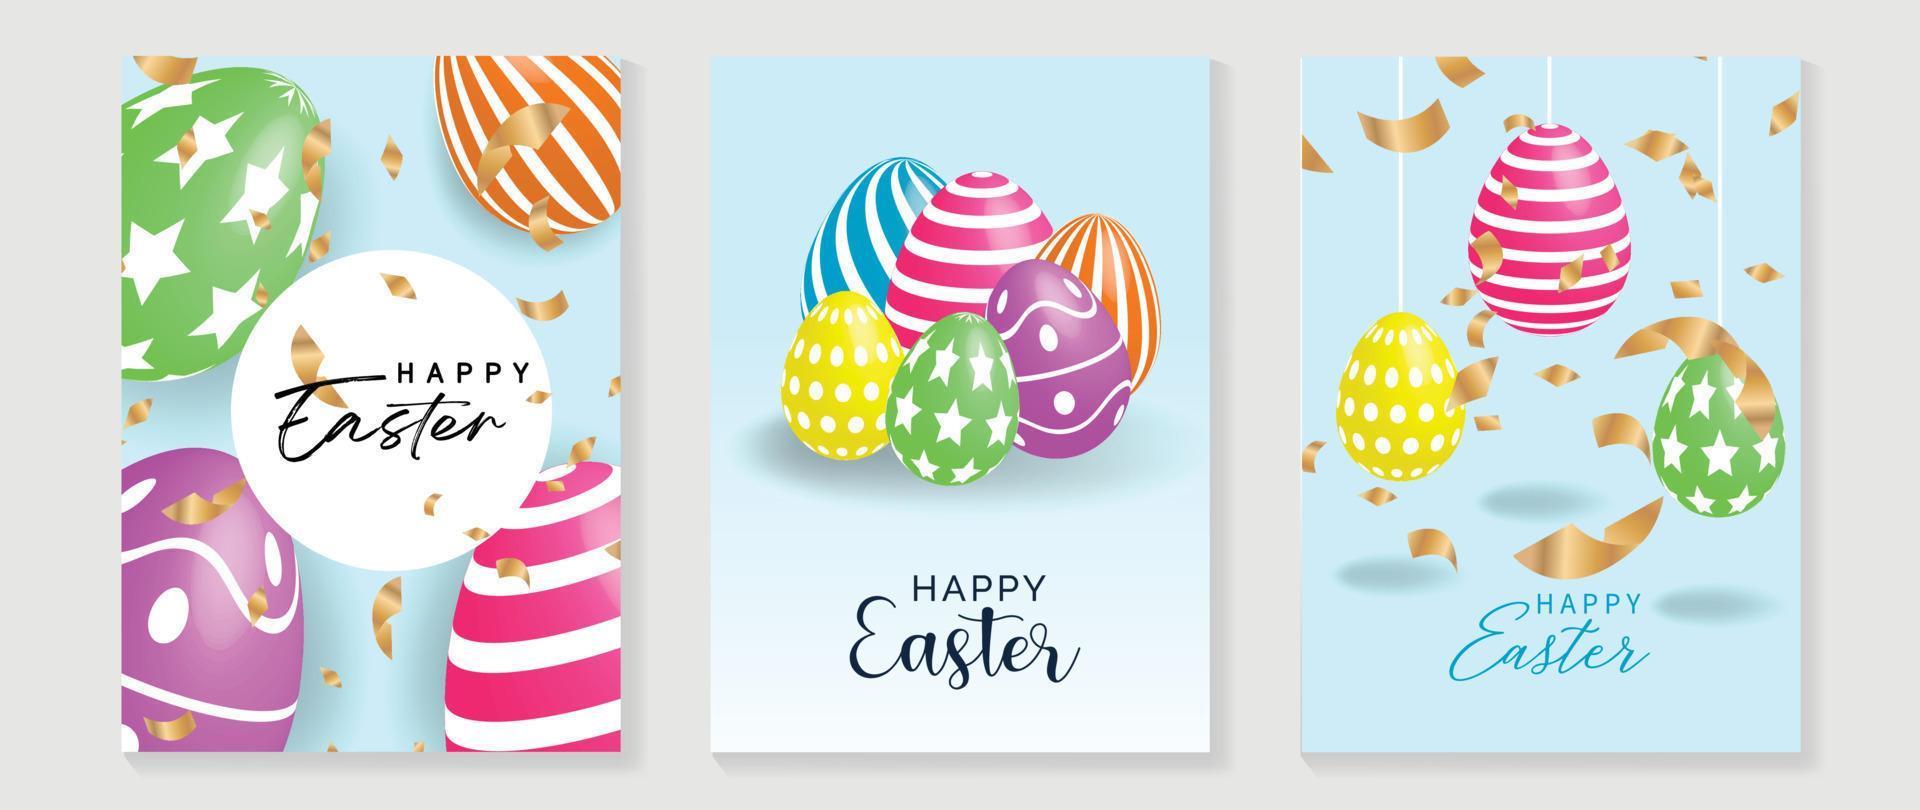 Happy Easter luxury element cover vector set. Elegant 3D shiny colorful pattern easter eggs with gold confetti ribbon on blue background. Adorable glamorous design for decorative, card, kids, poster.